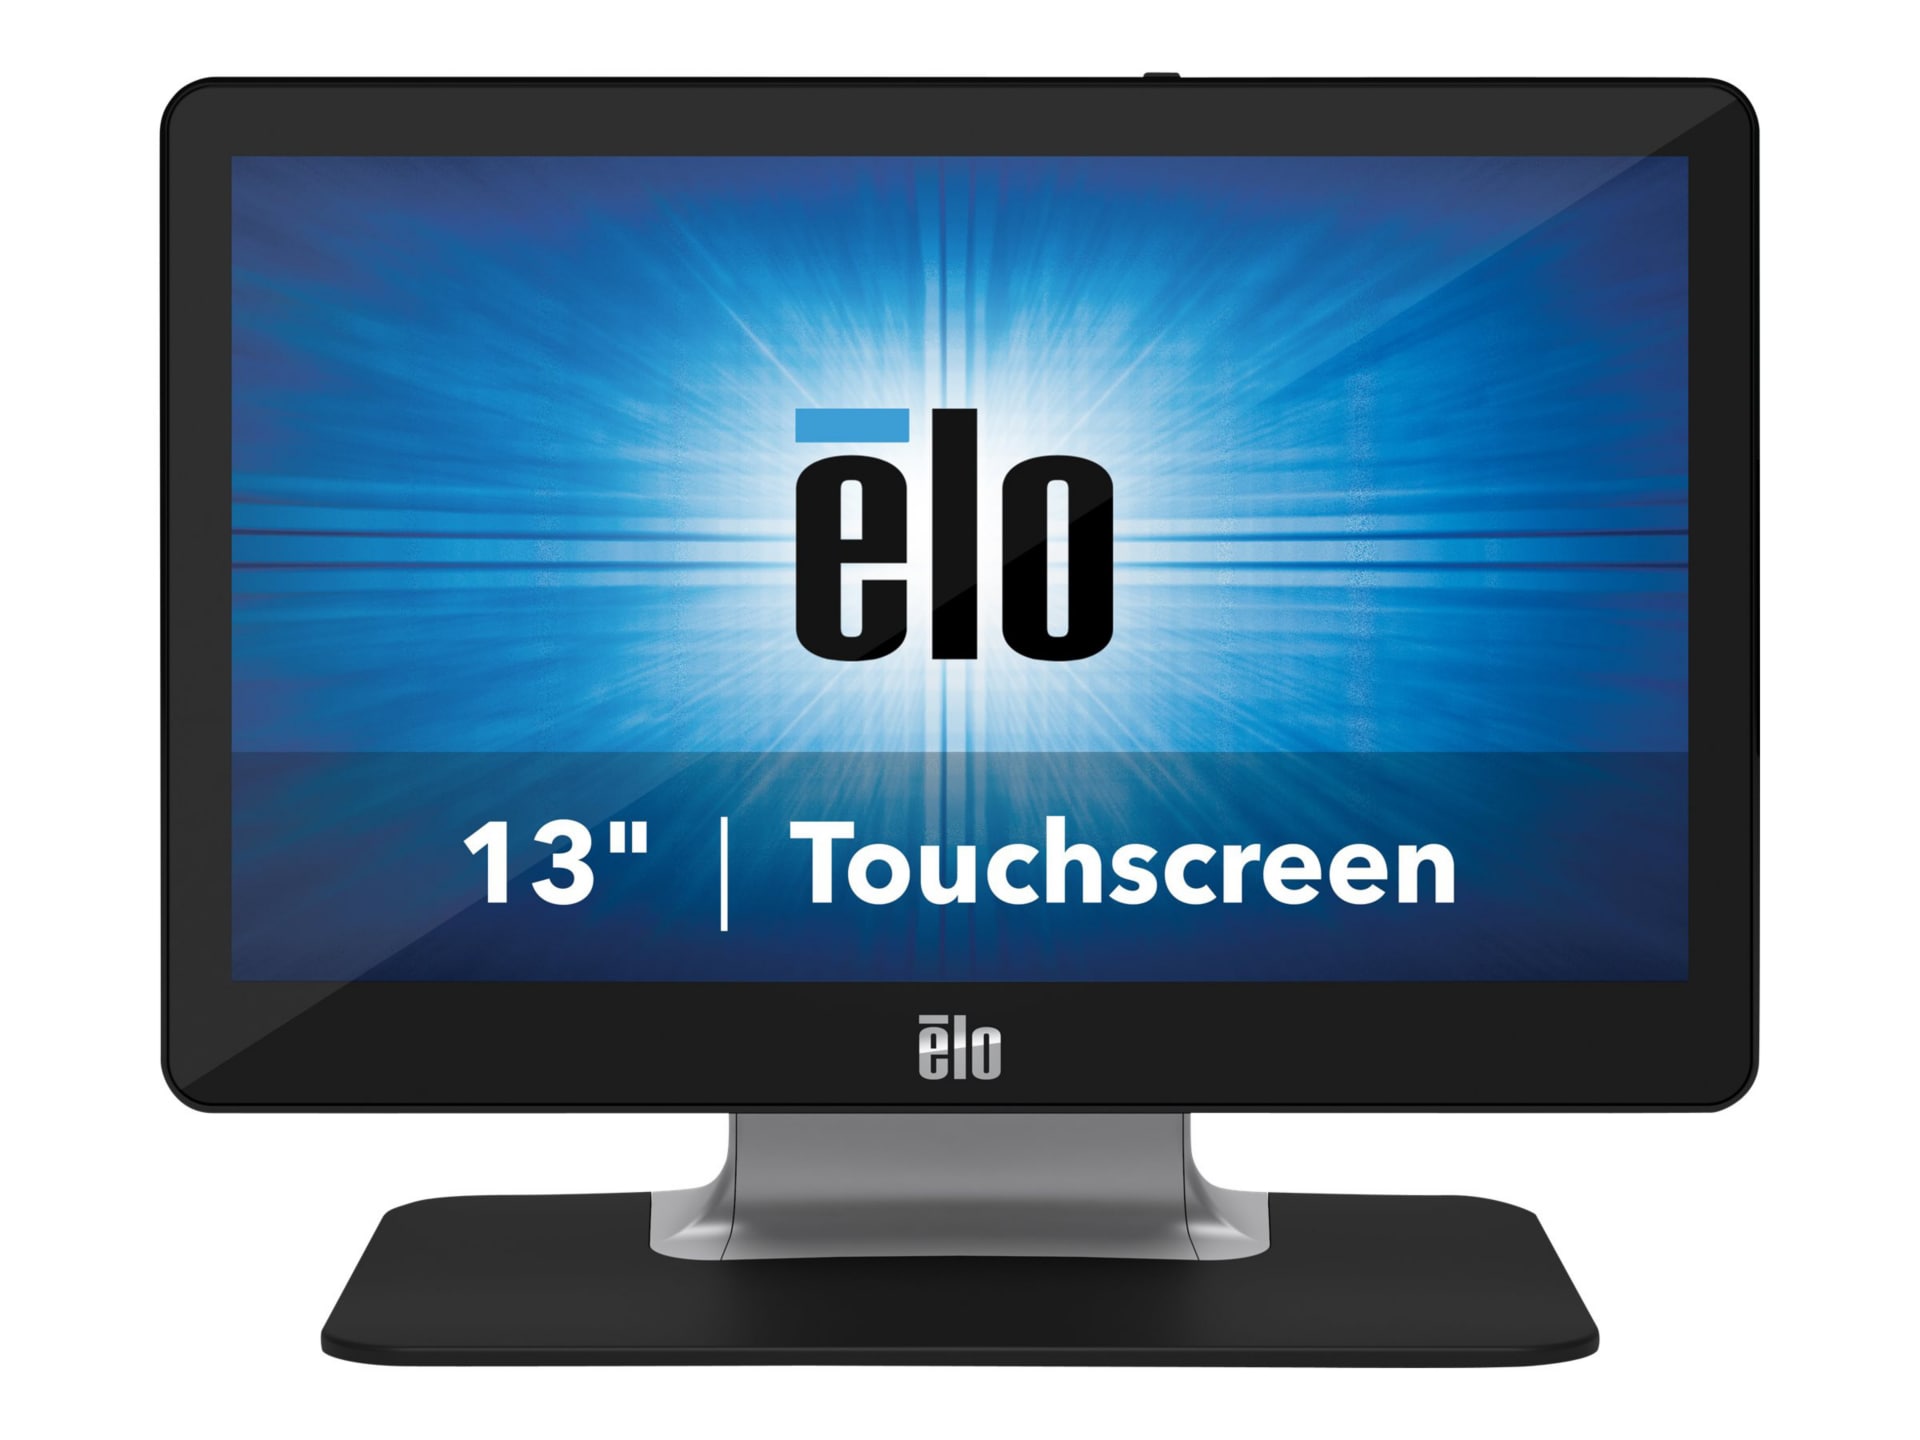 Elo ET1302L - with Stand - LCD monitor - Full HD (1080p) - 13.3"